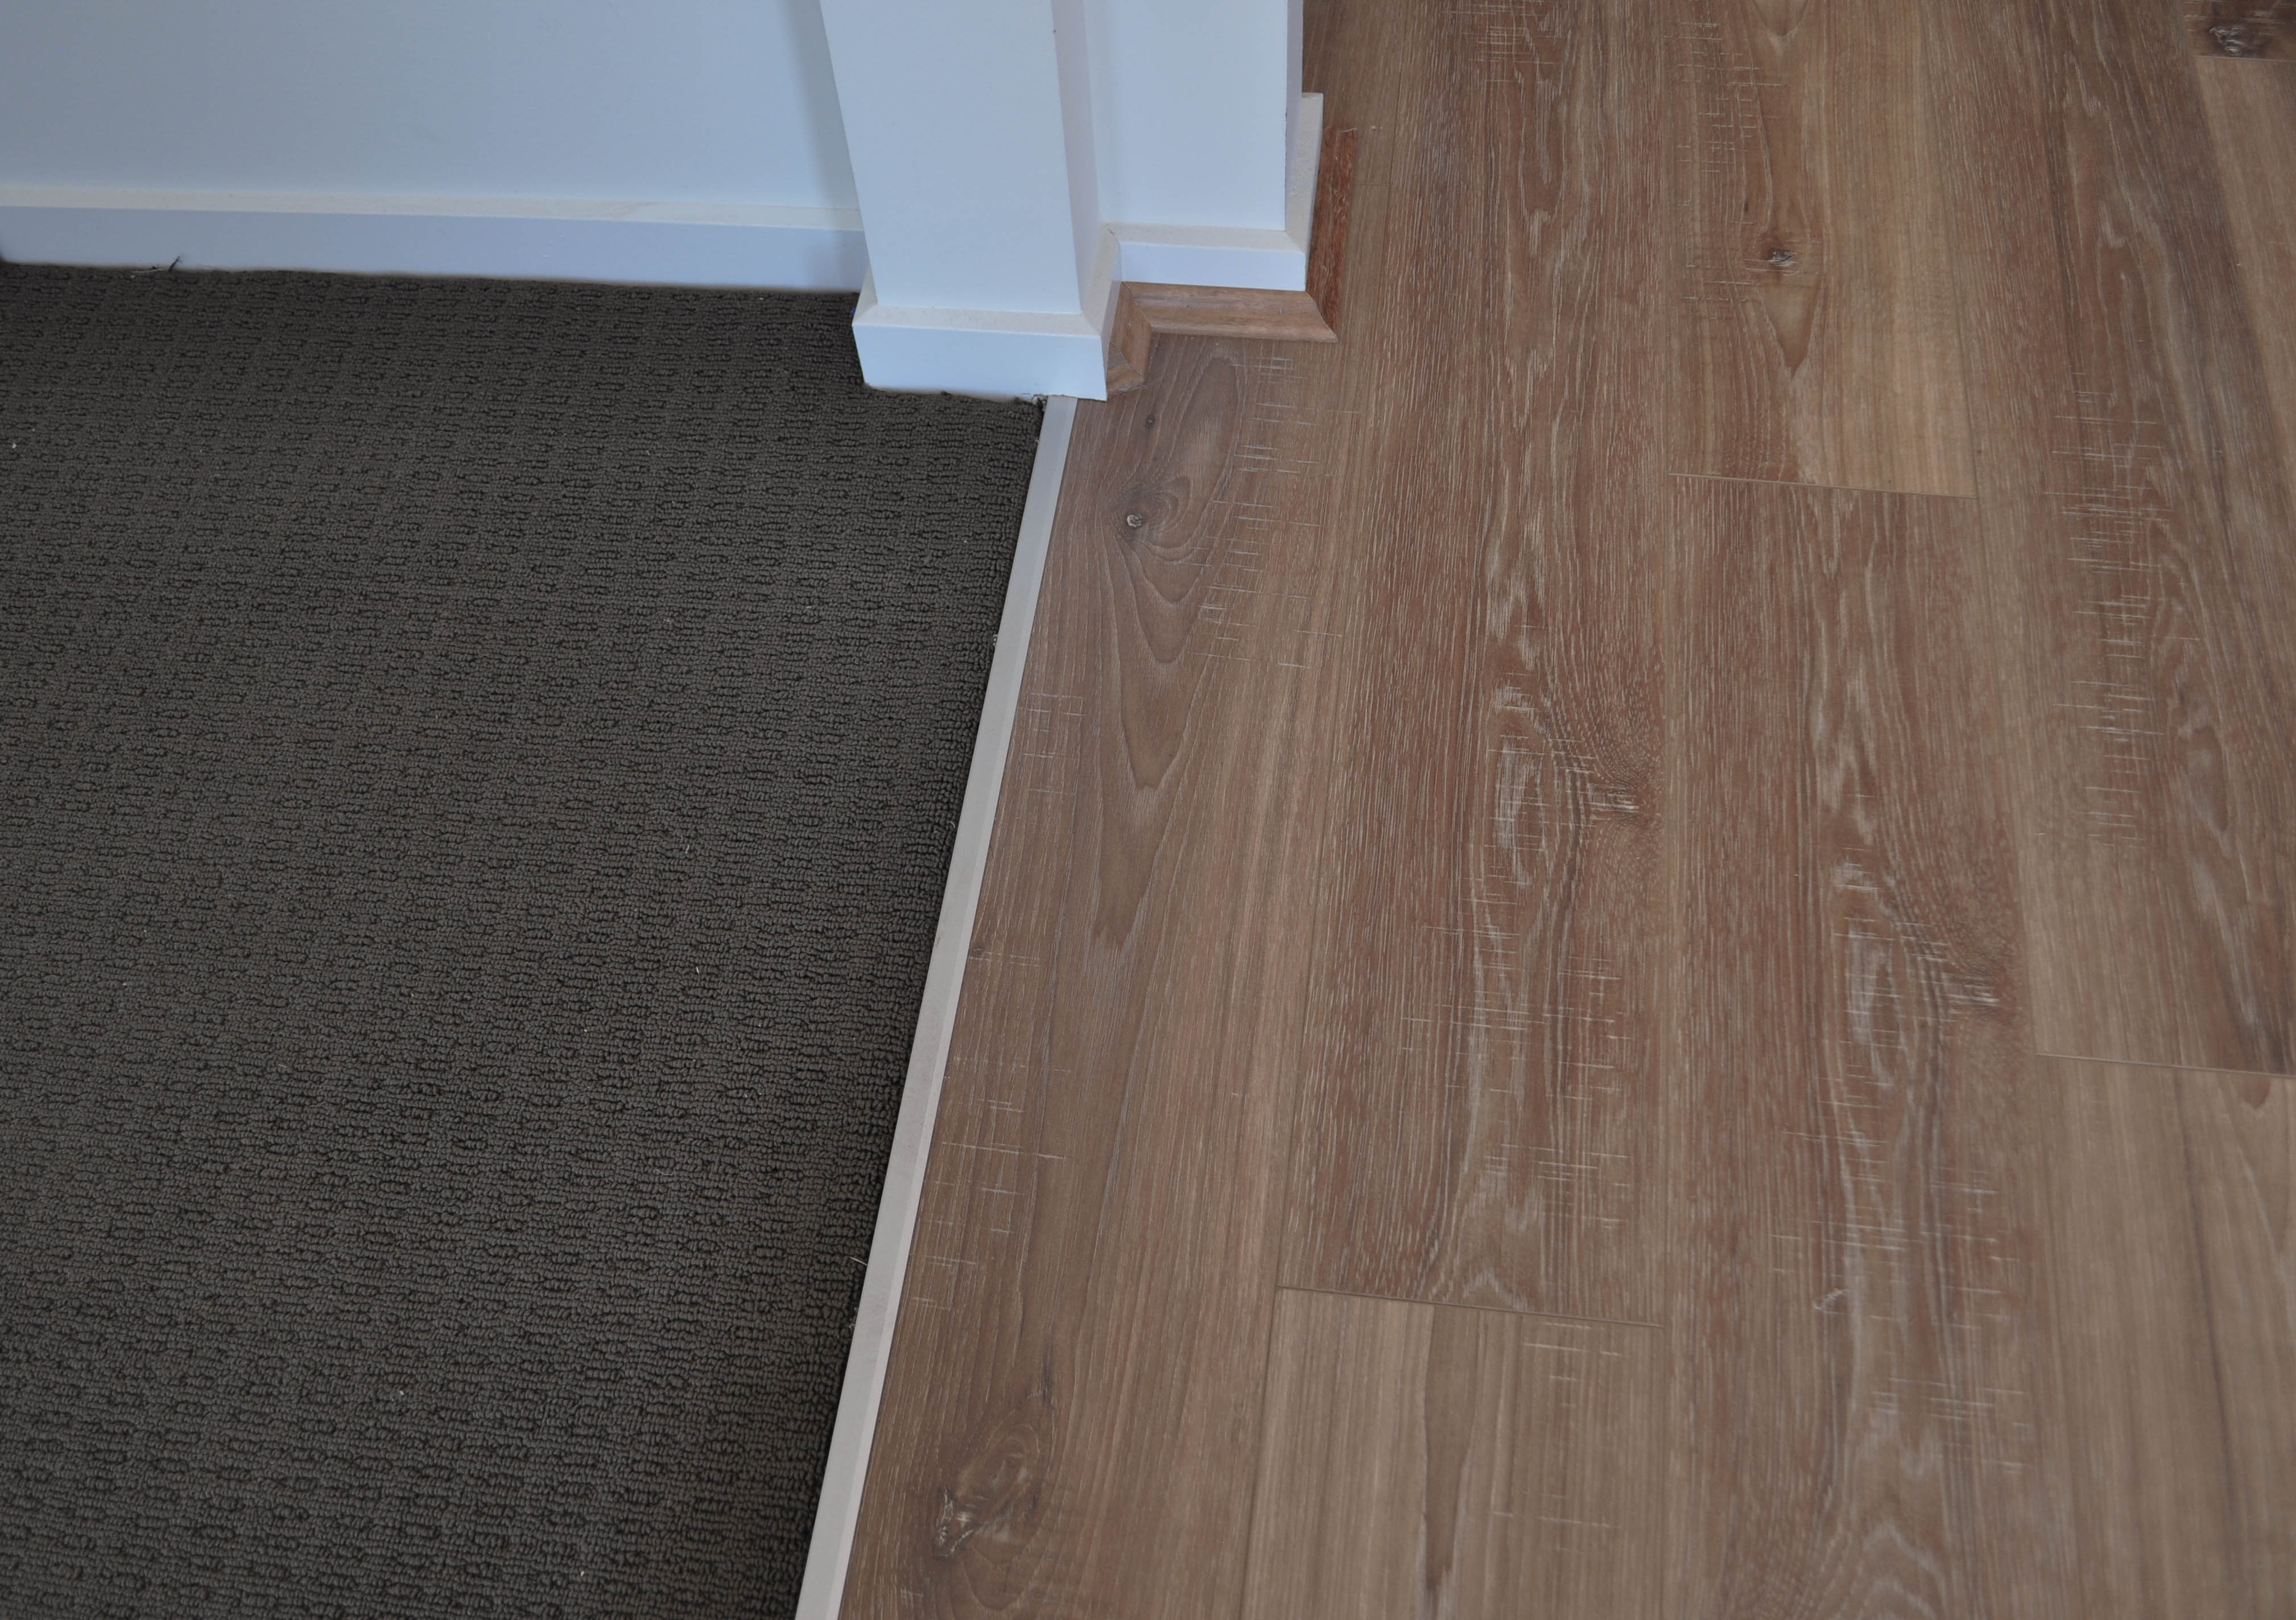 showing the elegant interior decor created by the 12mm thick aged oak laminate flooring installed in a room supplied and 
  installed by Concord Floors.The room is in a house in the suburb of tarneit, hoppers Crossing Vic 3340. The picture shows Laminate floorboards lock into each other at their perimiter boundaries
 with an engineered locking system to form one continuous floor. They simply click together and when in place they stay together.